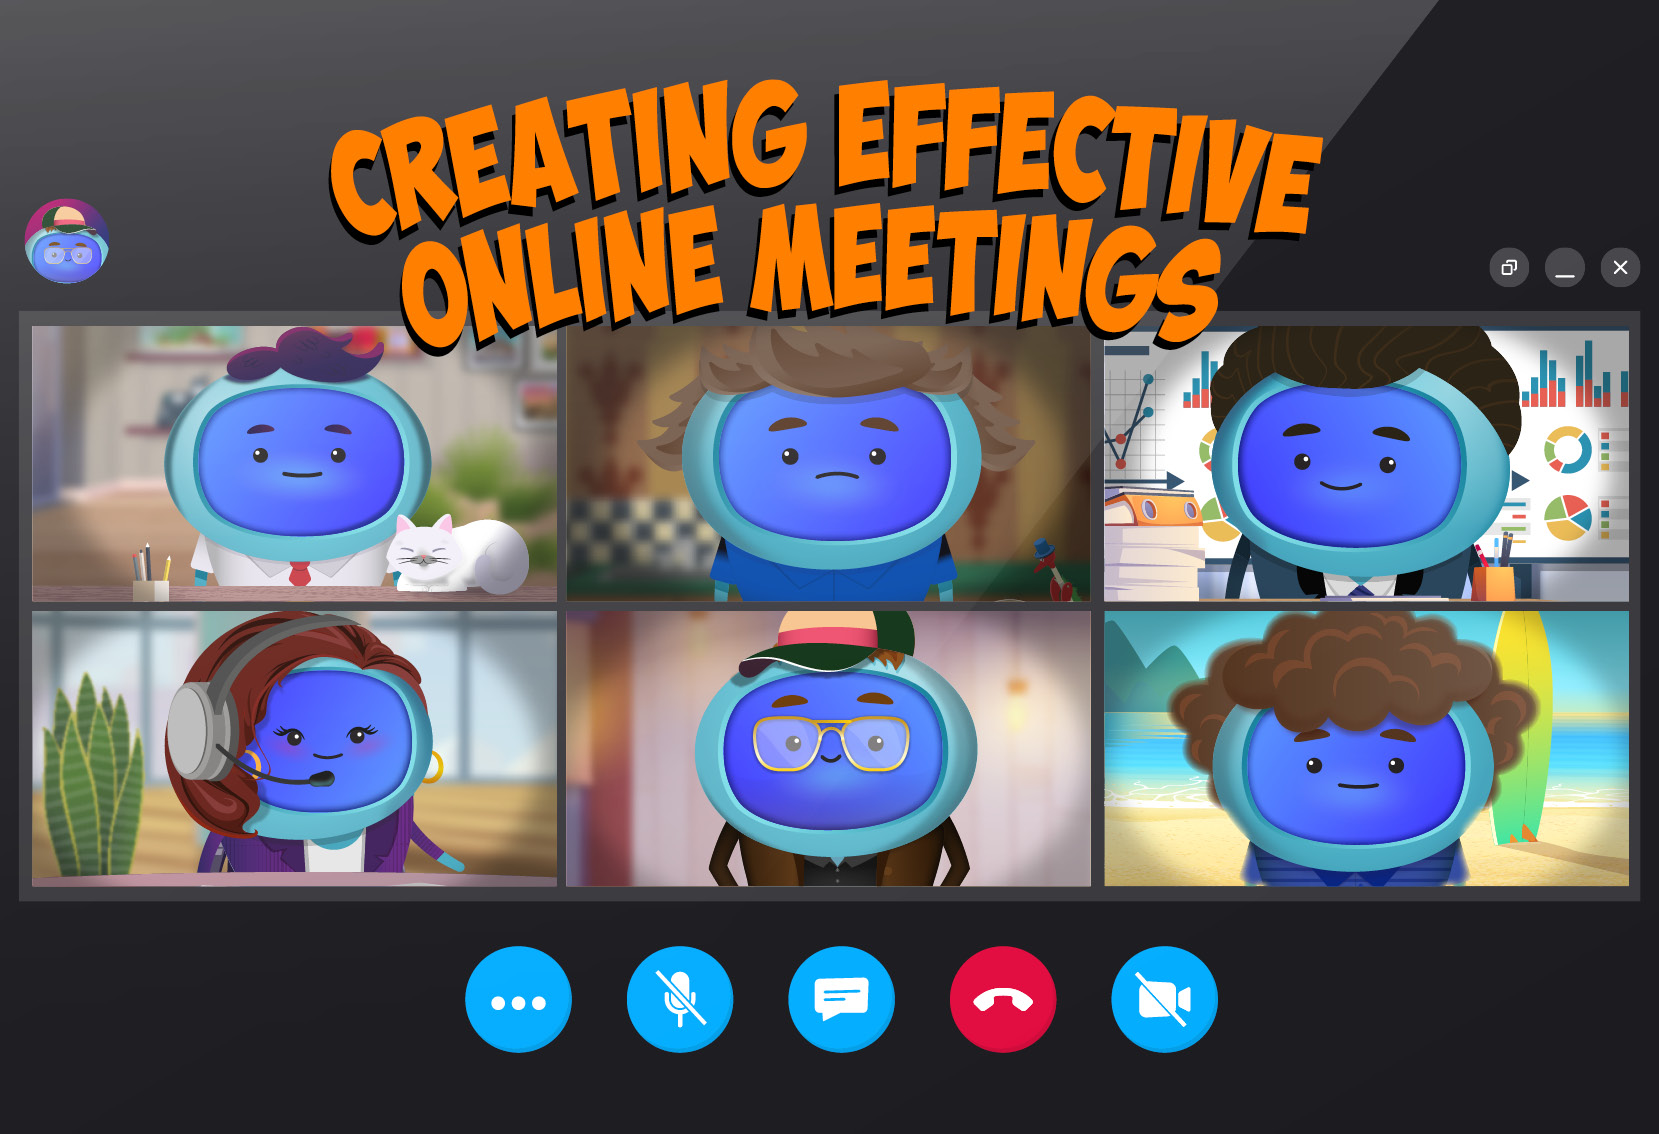 iAM 00286 - Creating Effective Online Meetings - LMS Thumbnails